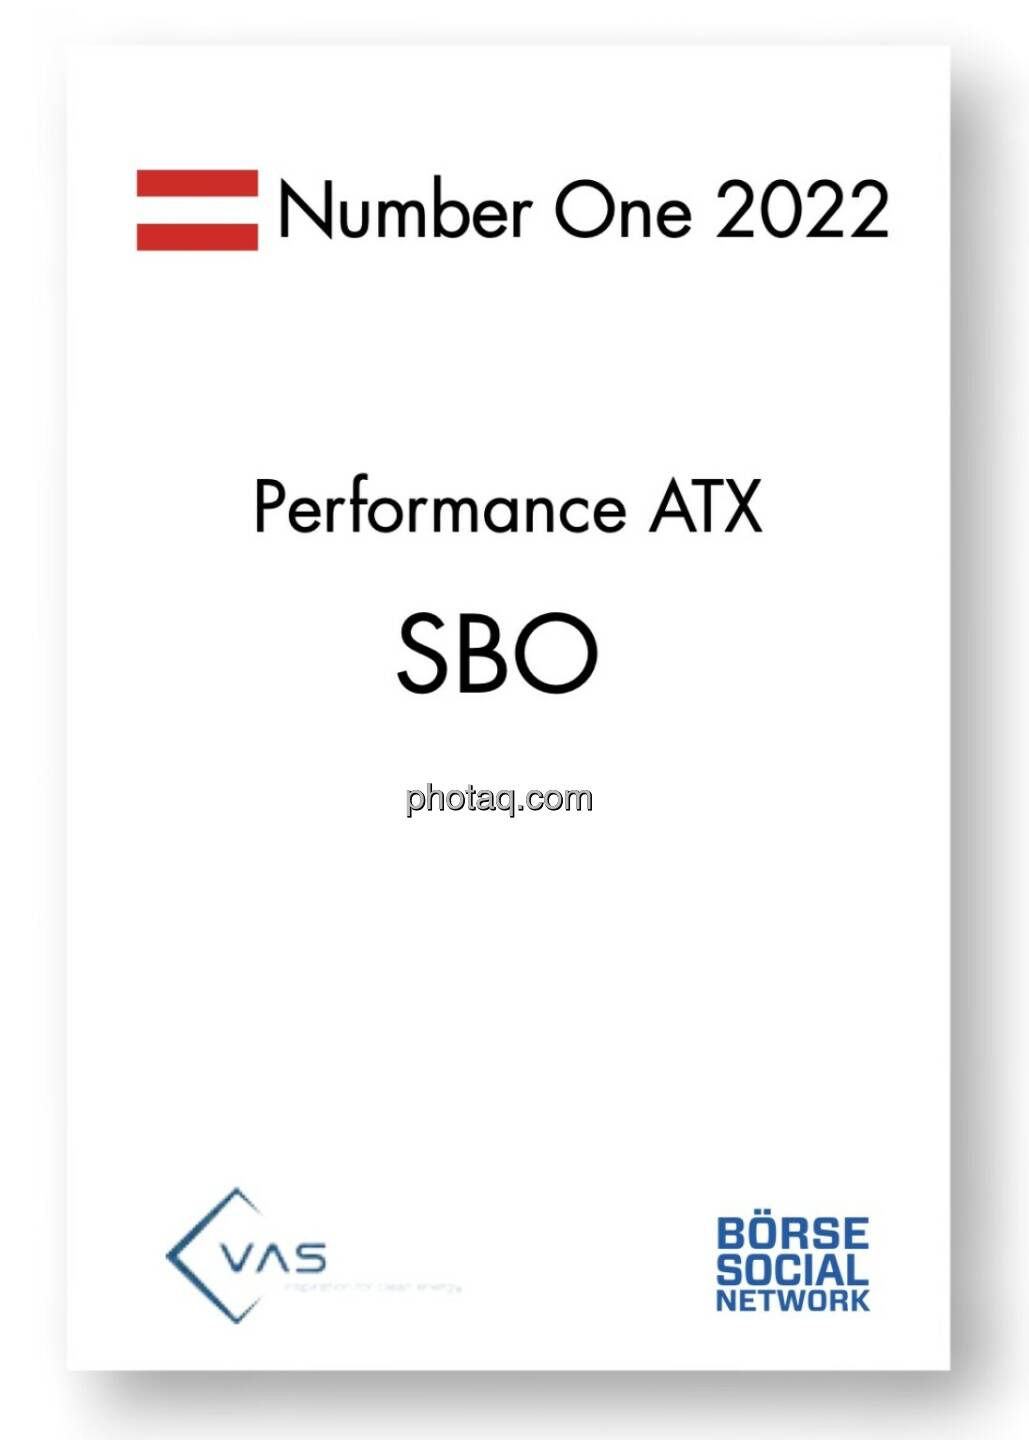 Number One Performance ATX: SBO